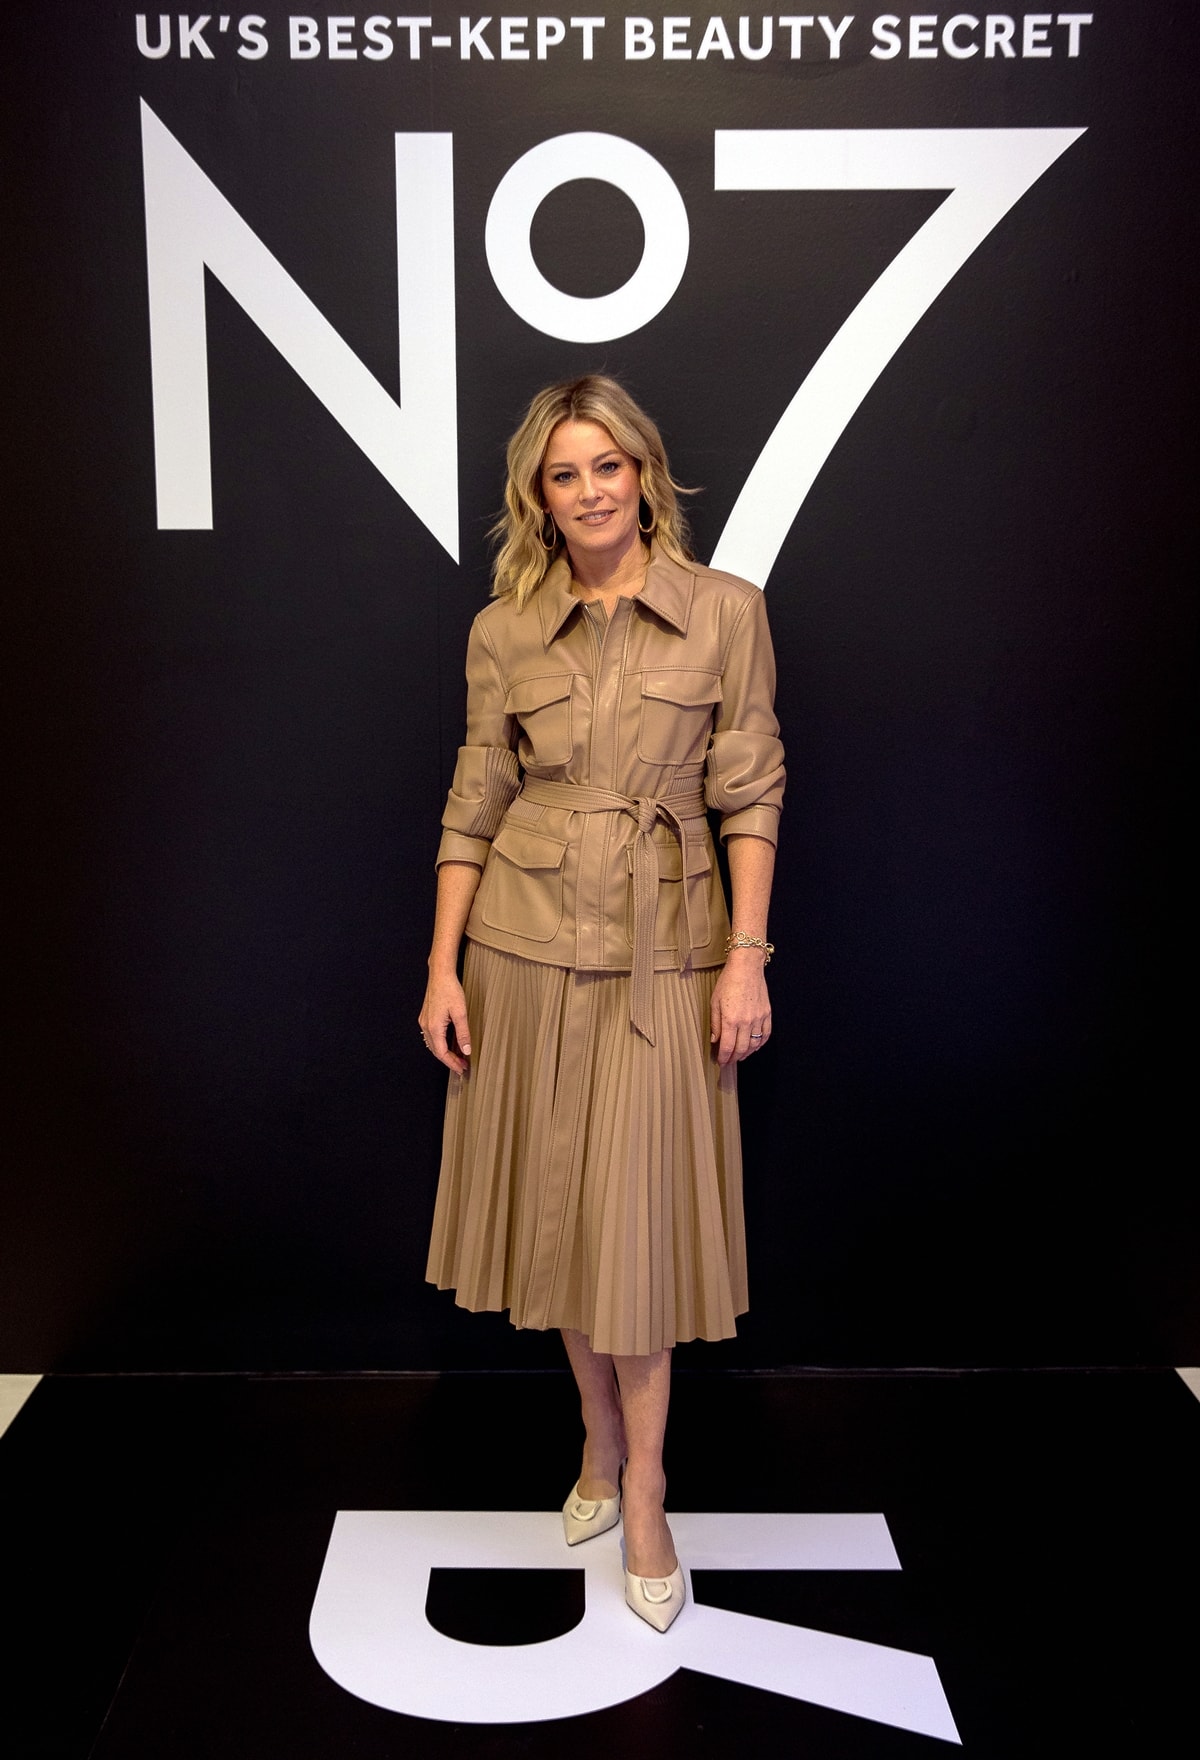 On October 26, 2023, Elizabeth Banks stepped out in a Jonathan Simkhai faux-leather pleated dress to celebrate being the first-ever U.S. celebrity spokesperson for No7 at their Future Renew Reversal lounge event in New York City